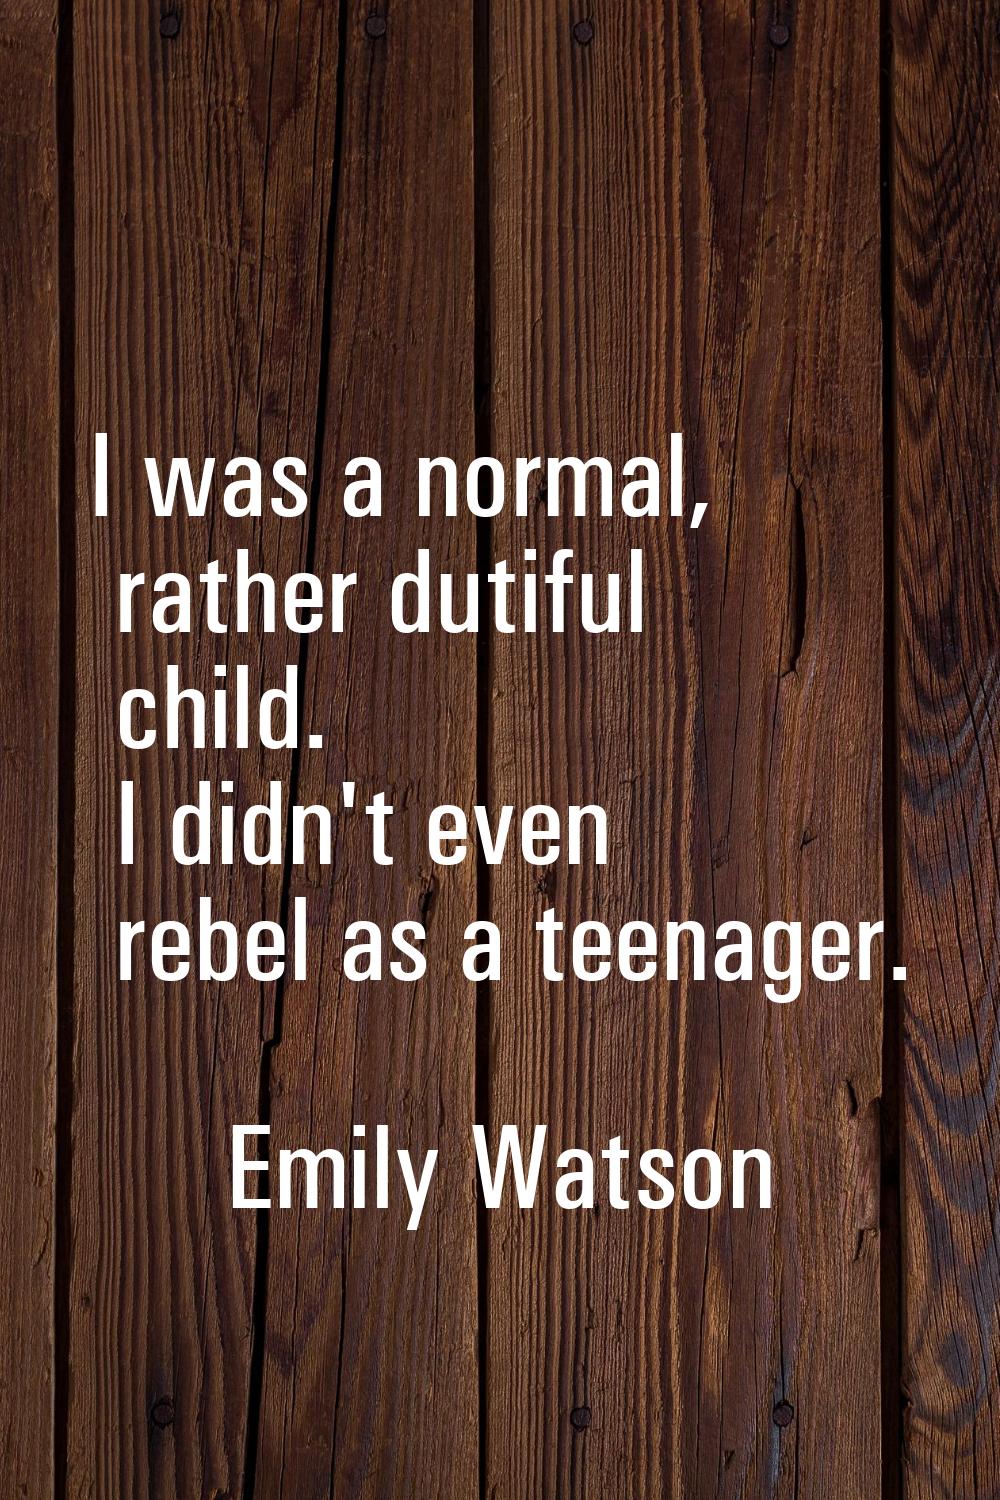 I was a normal, rather dutiful child. I didn't even rebel as a teenager.